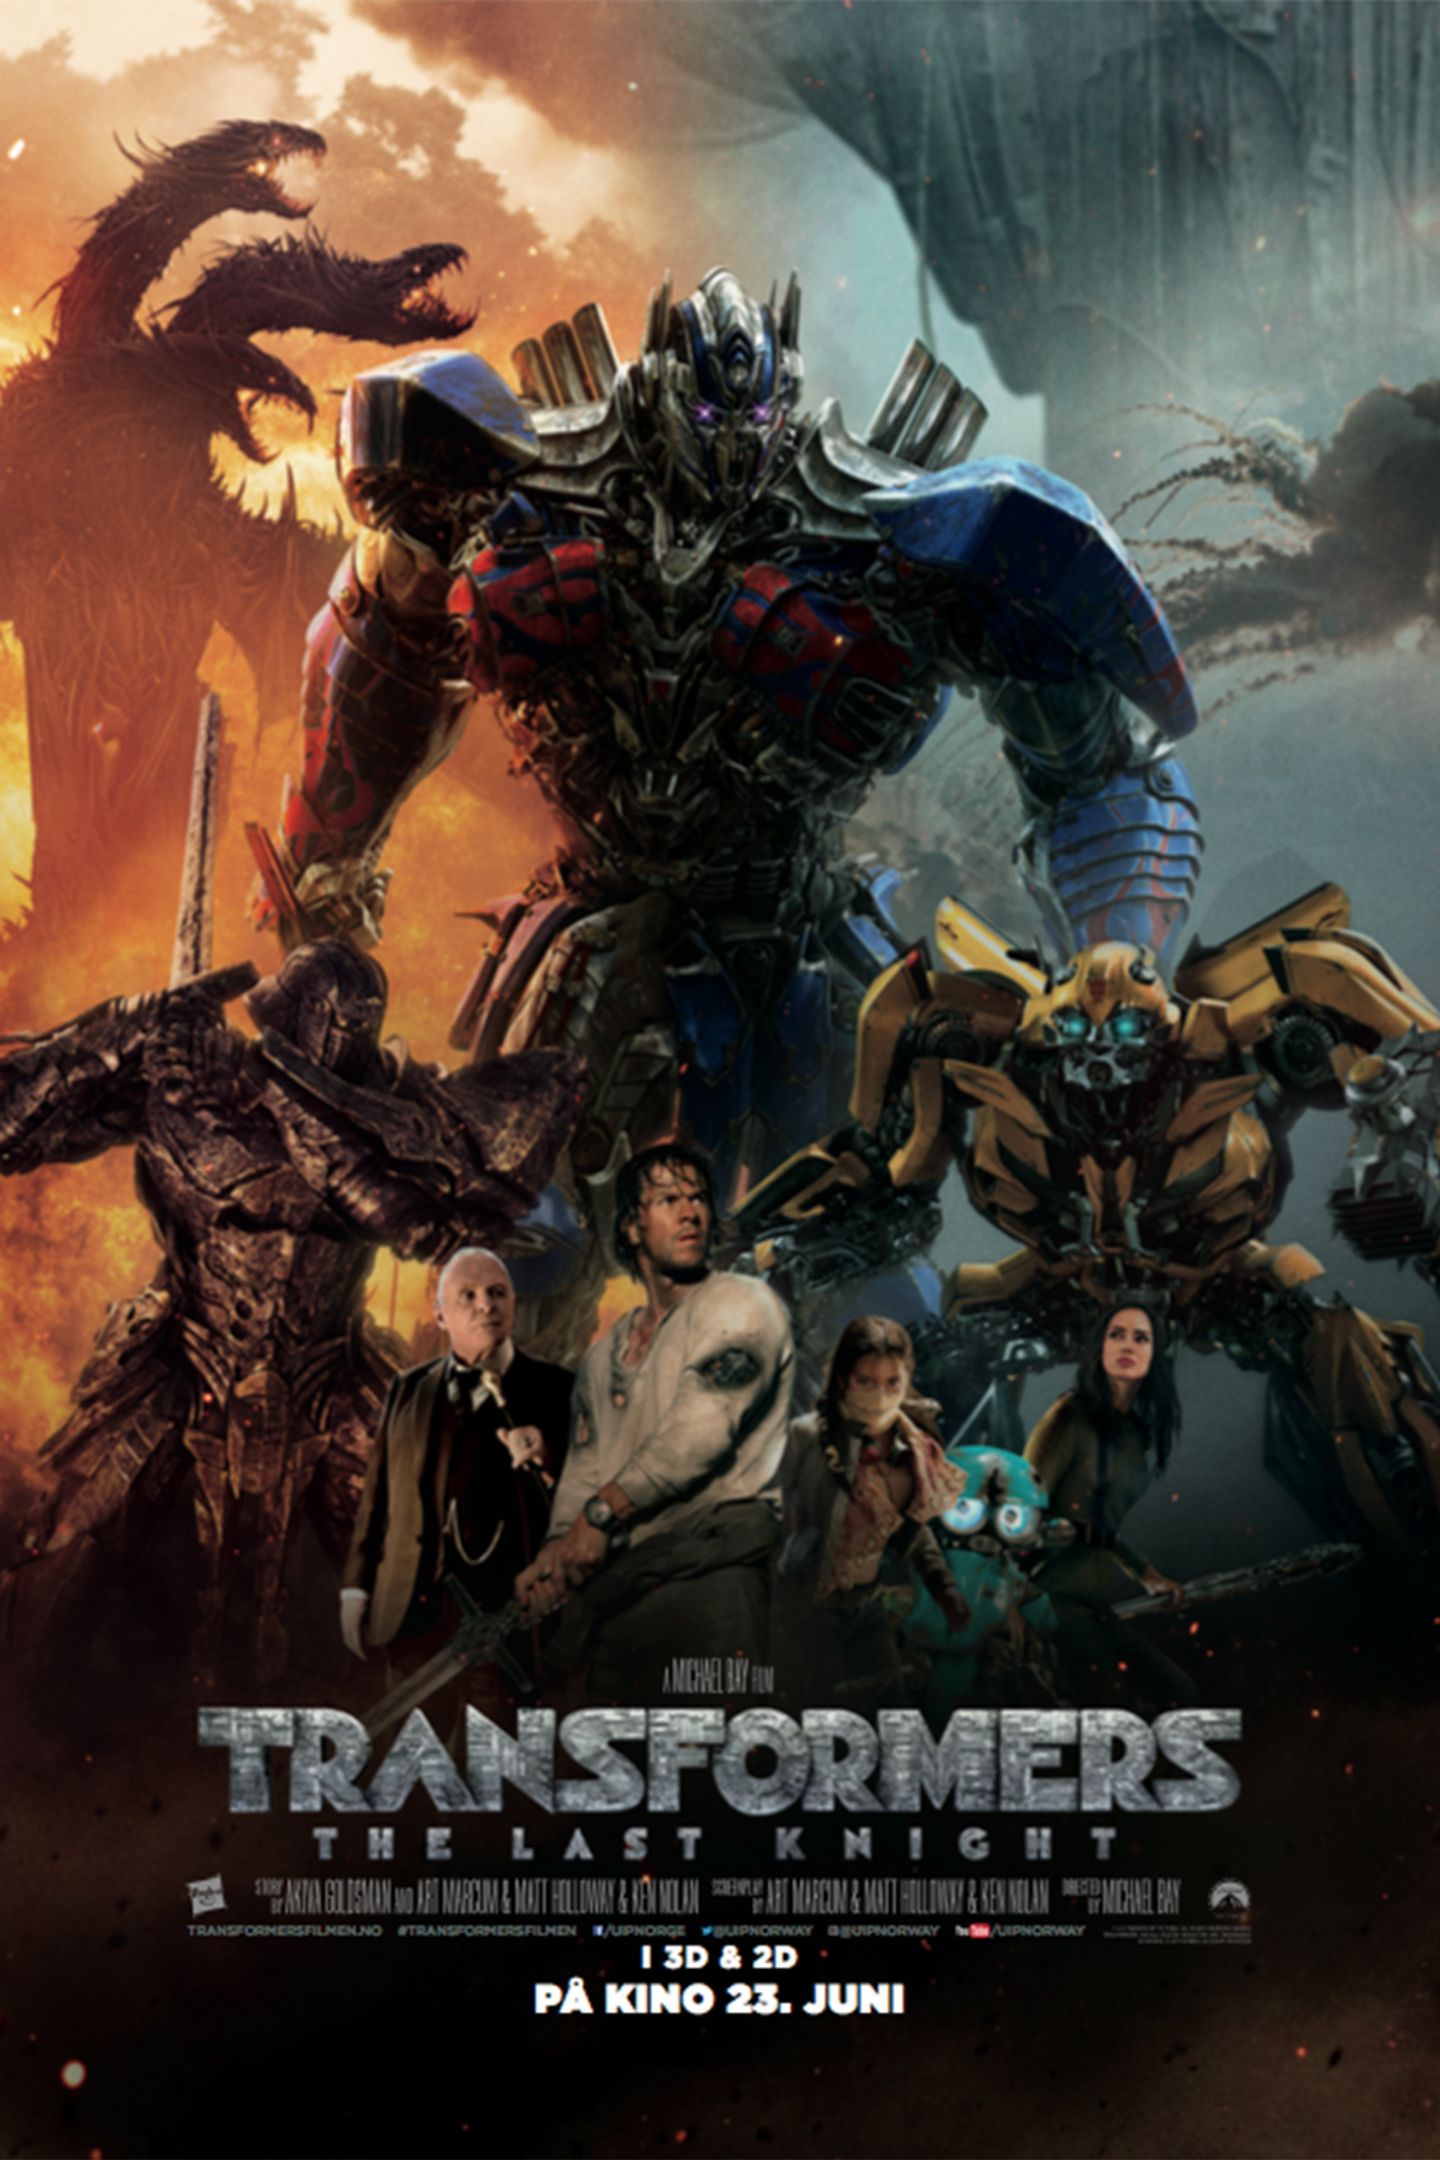 Plakat for 'Transformers: The Last Knight'